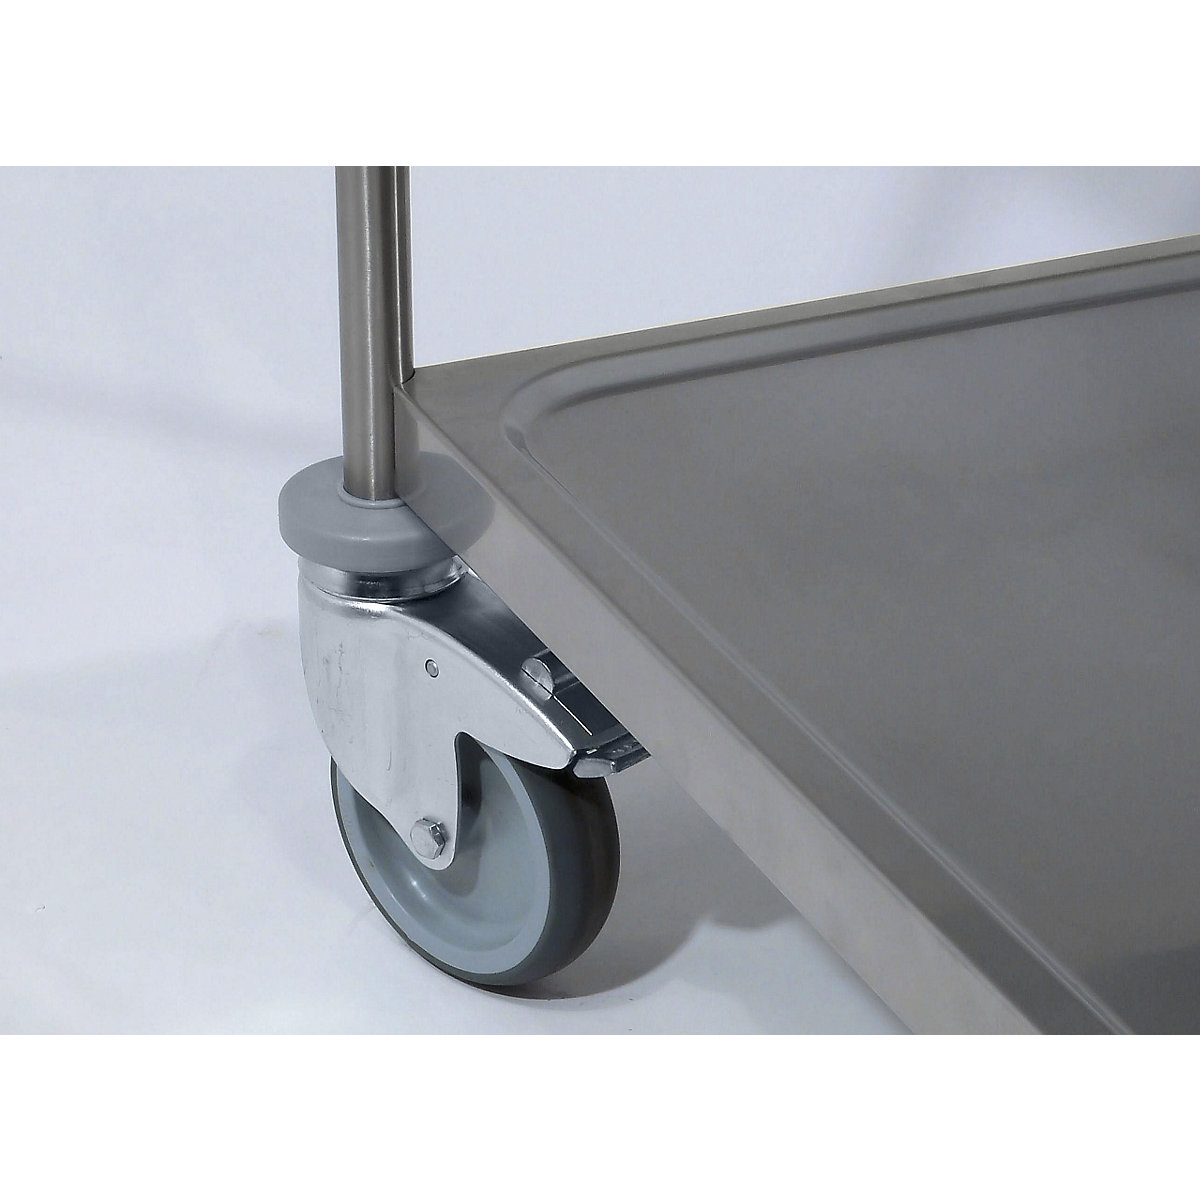 Stainless steel serving trolley (Product illustration 12)-11